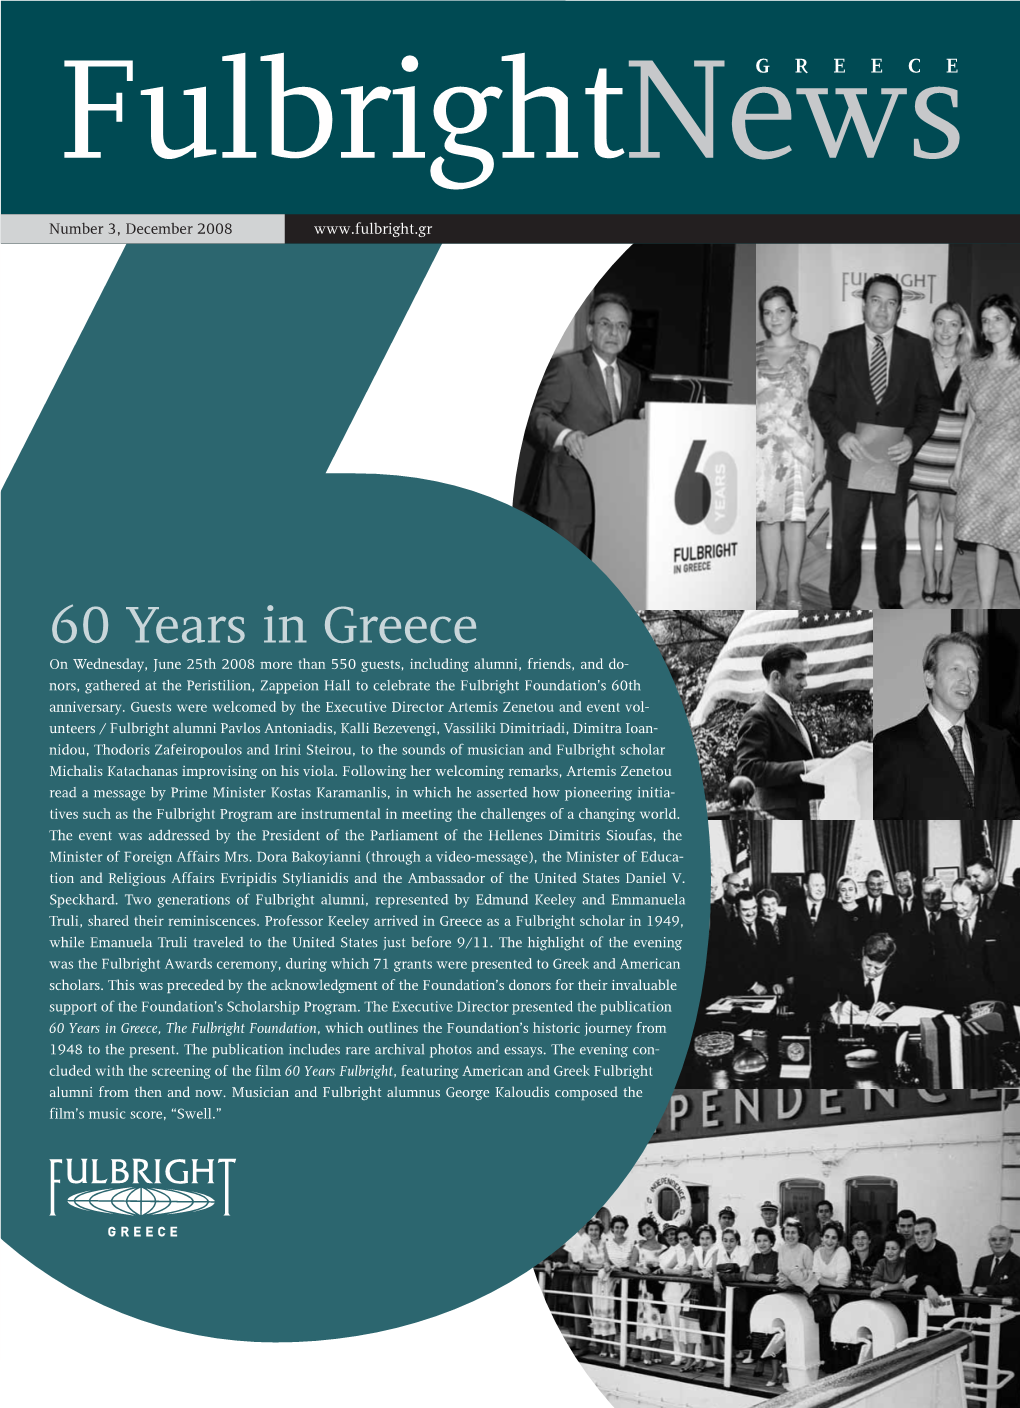 60 Years in Greece Matured Into an International Success Story